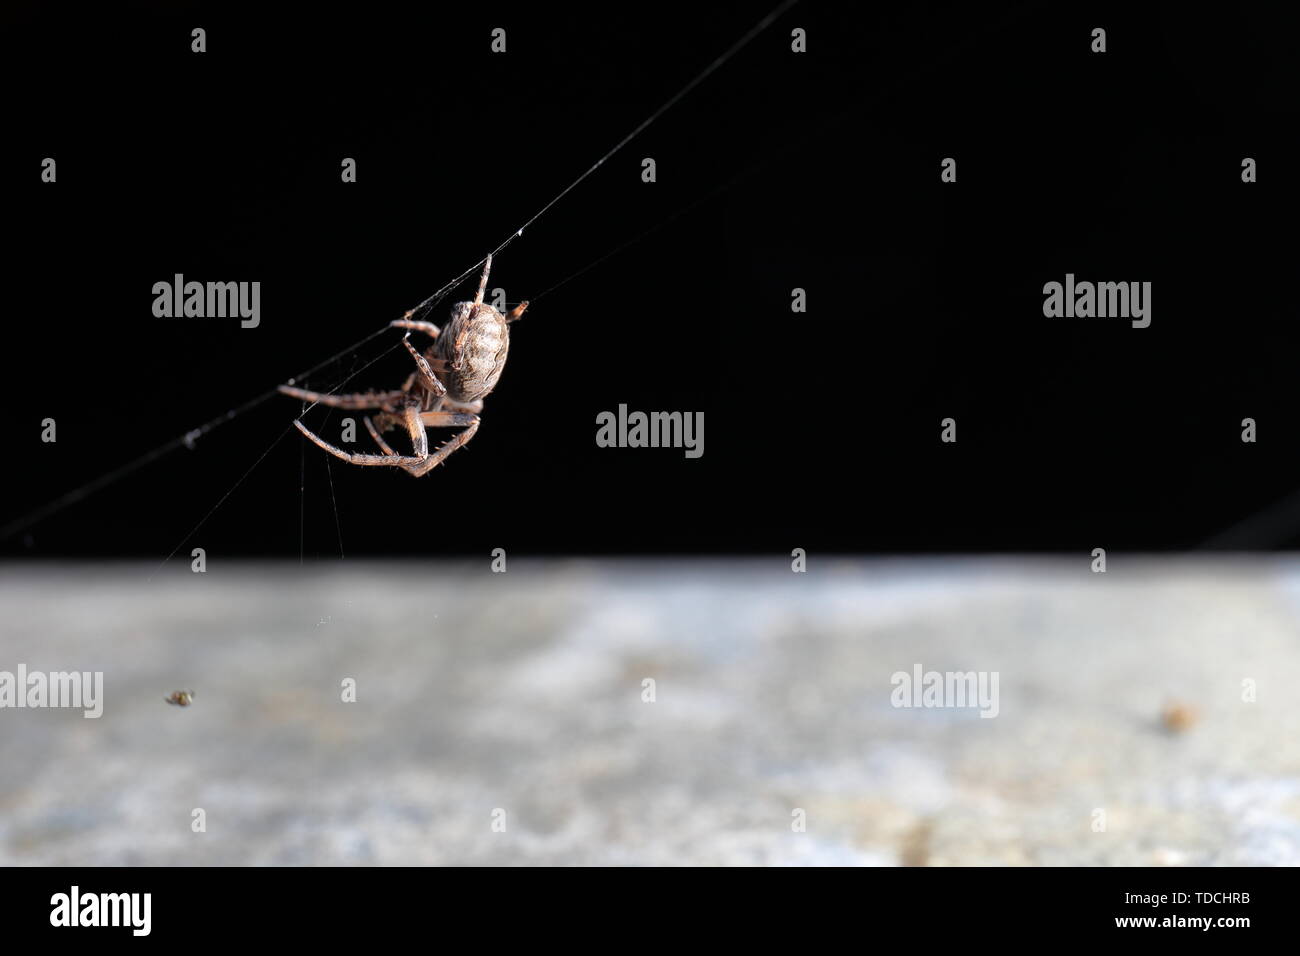 Fat brown spider climbing down a stand of web against a black background Stock Photo